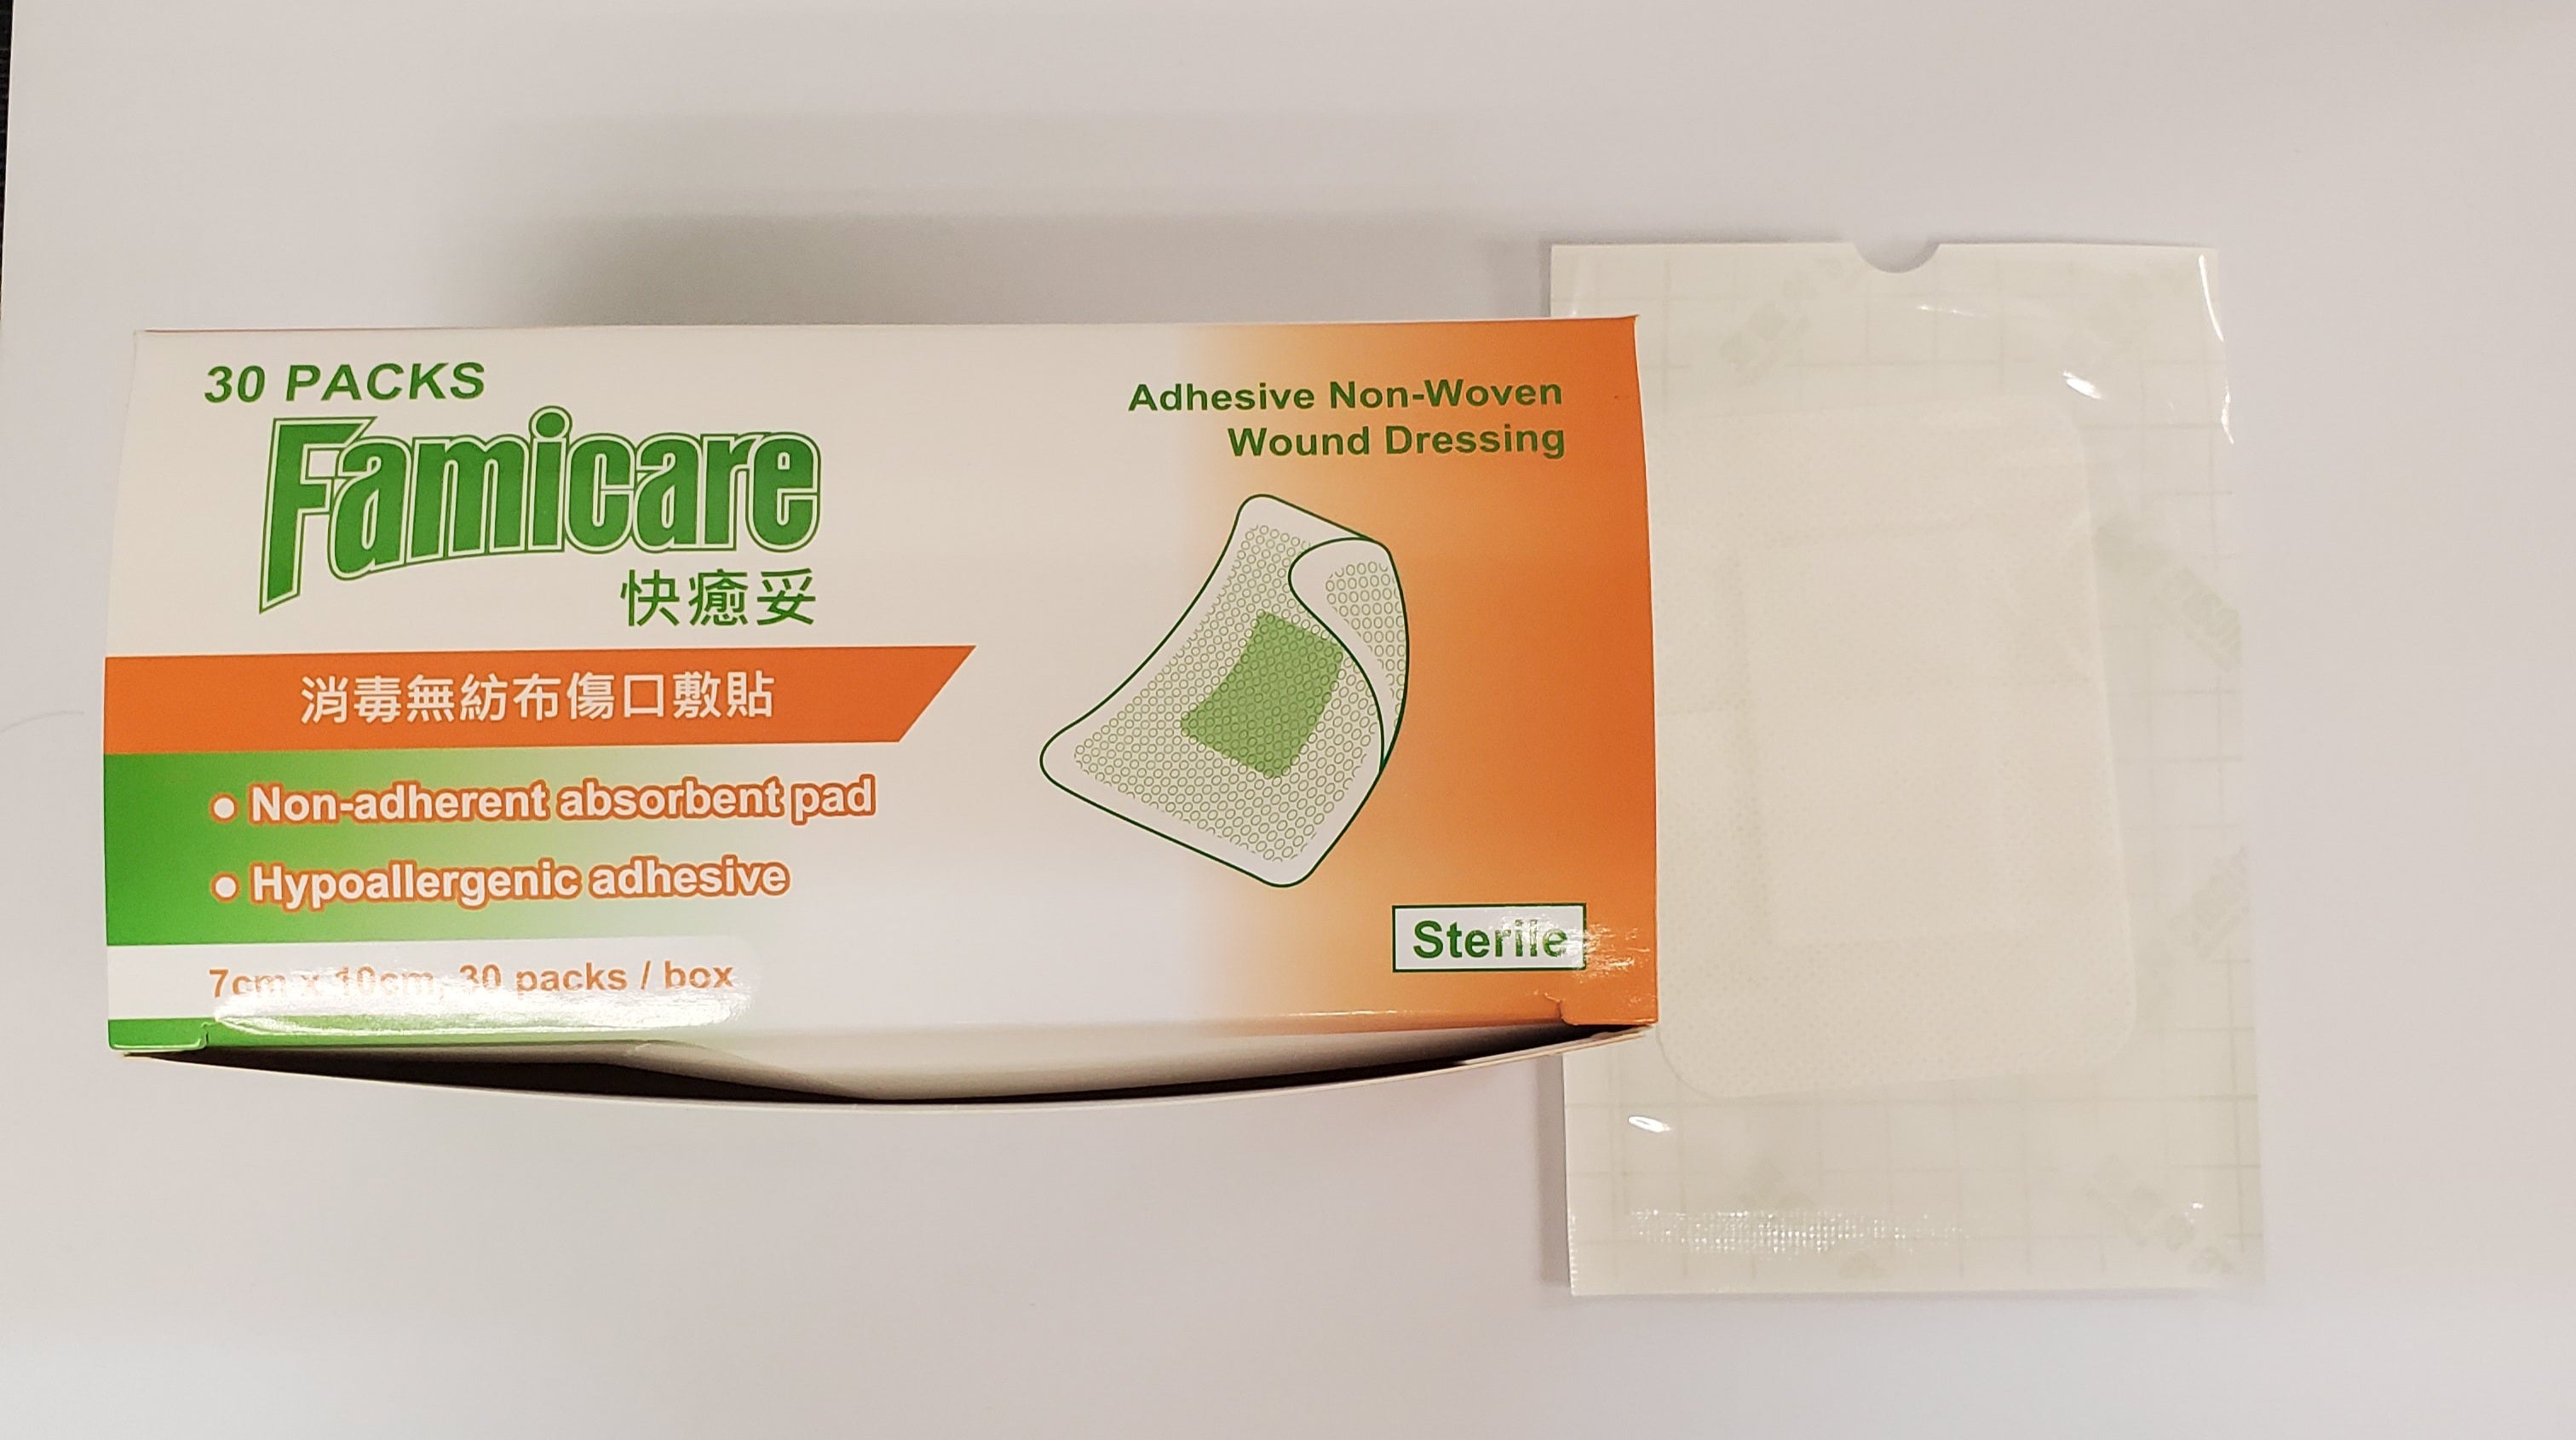 Famicare Adhesive Non-Woven Wound Dressing - 30PCS